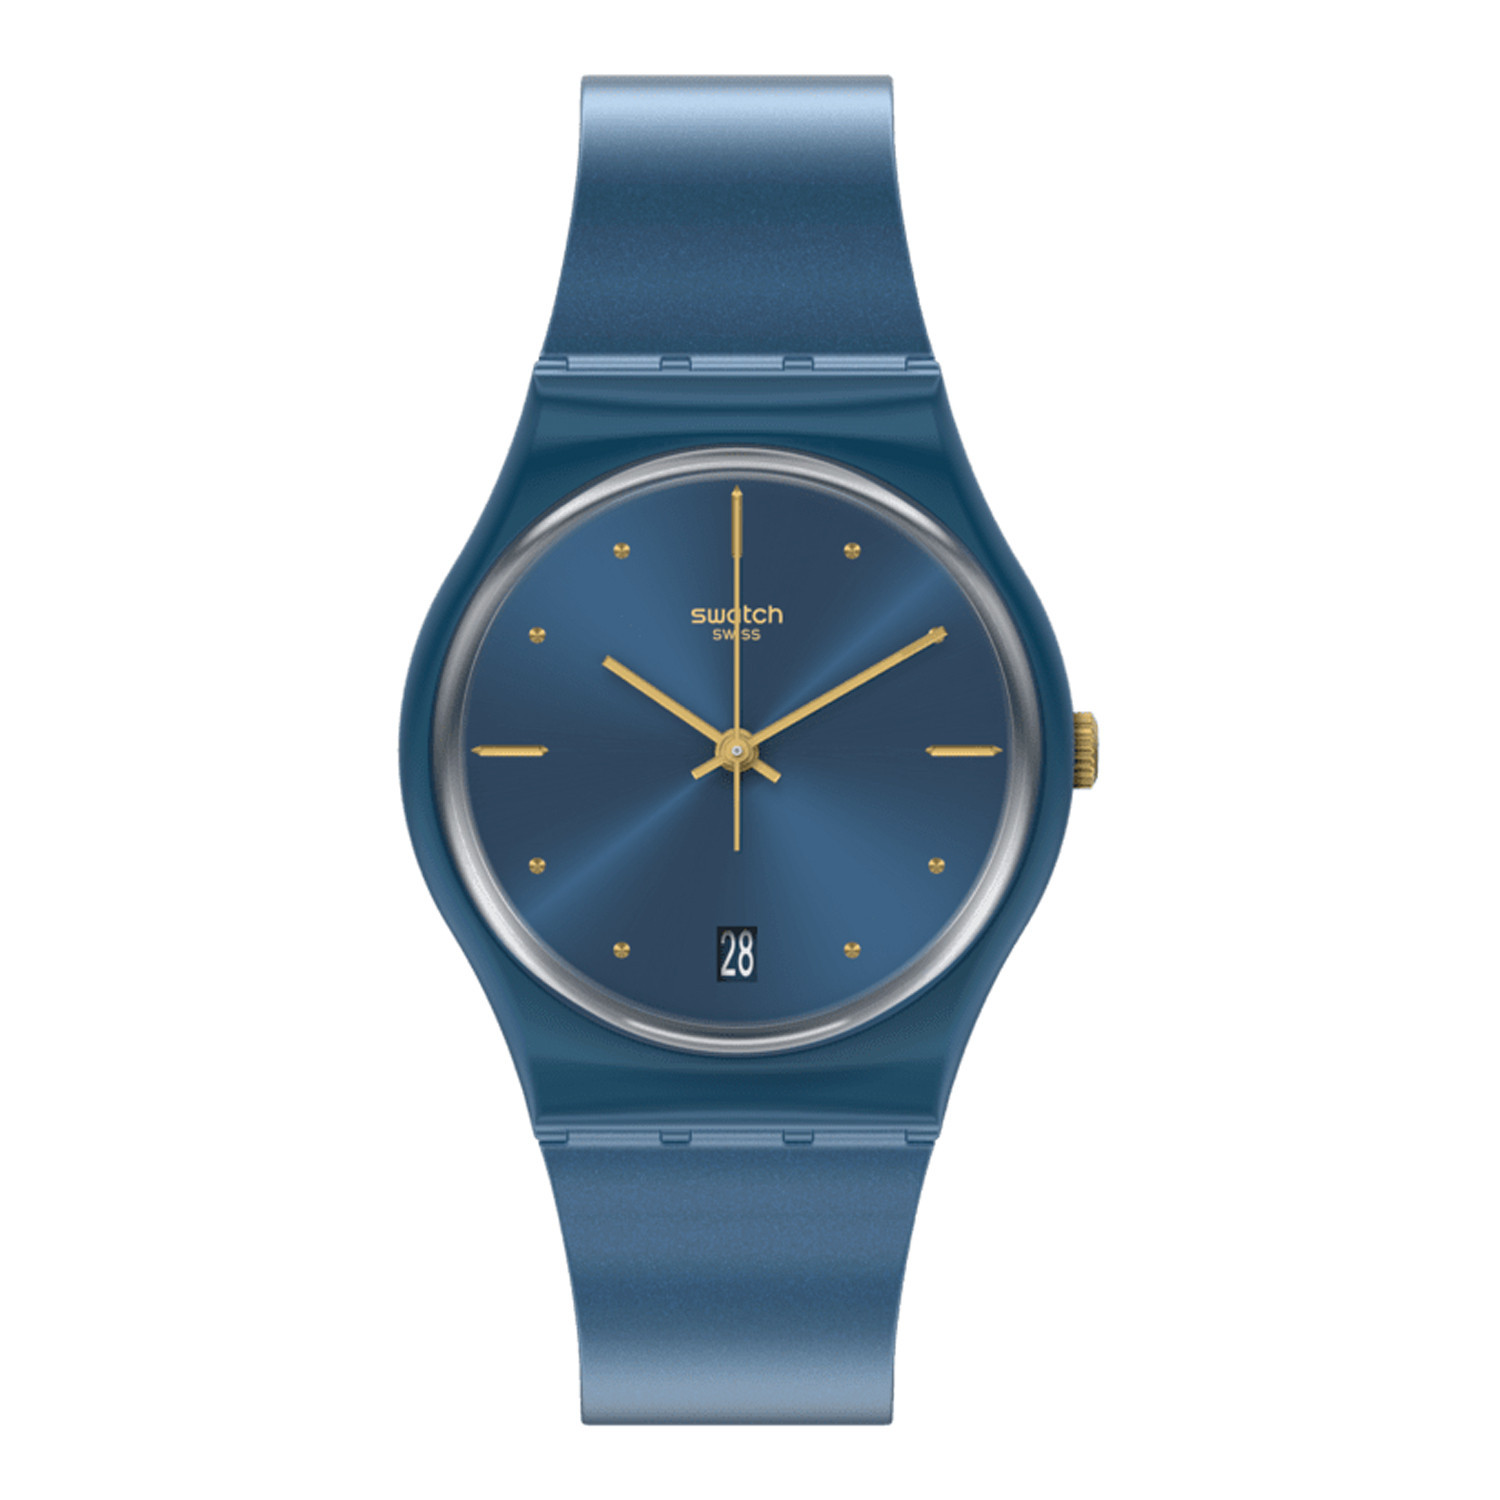 Montre femme Swatch Pearlyblue